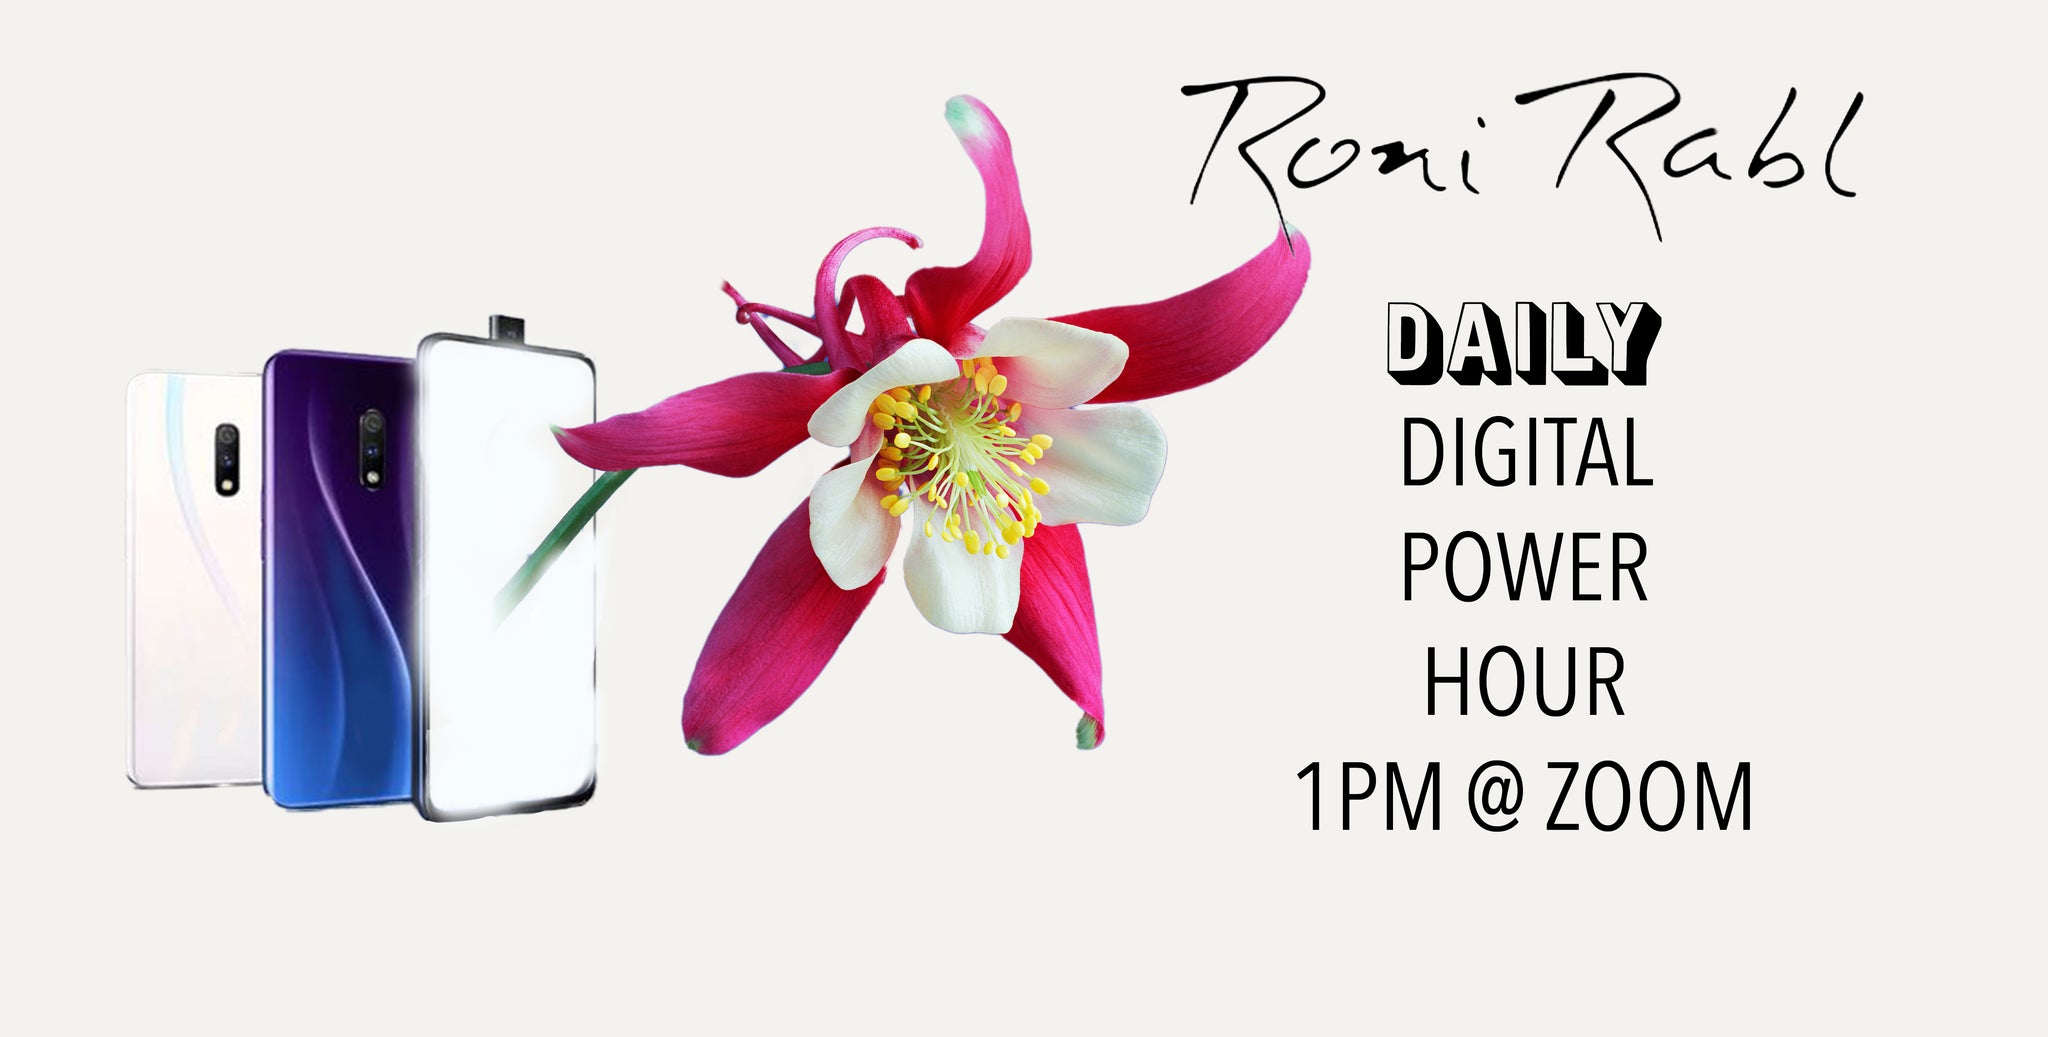 Join us for Digital Power Hour